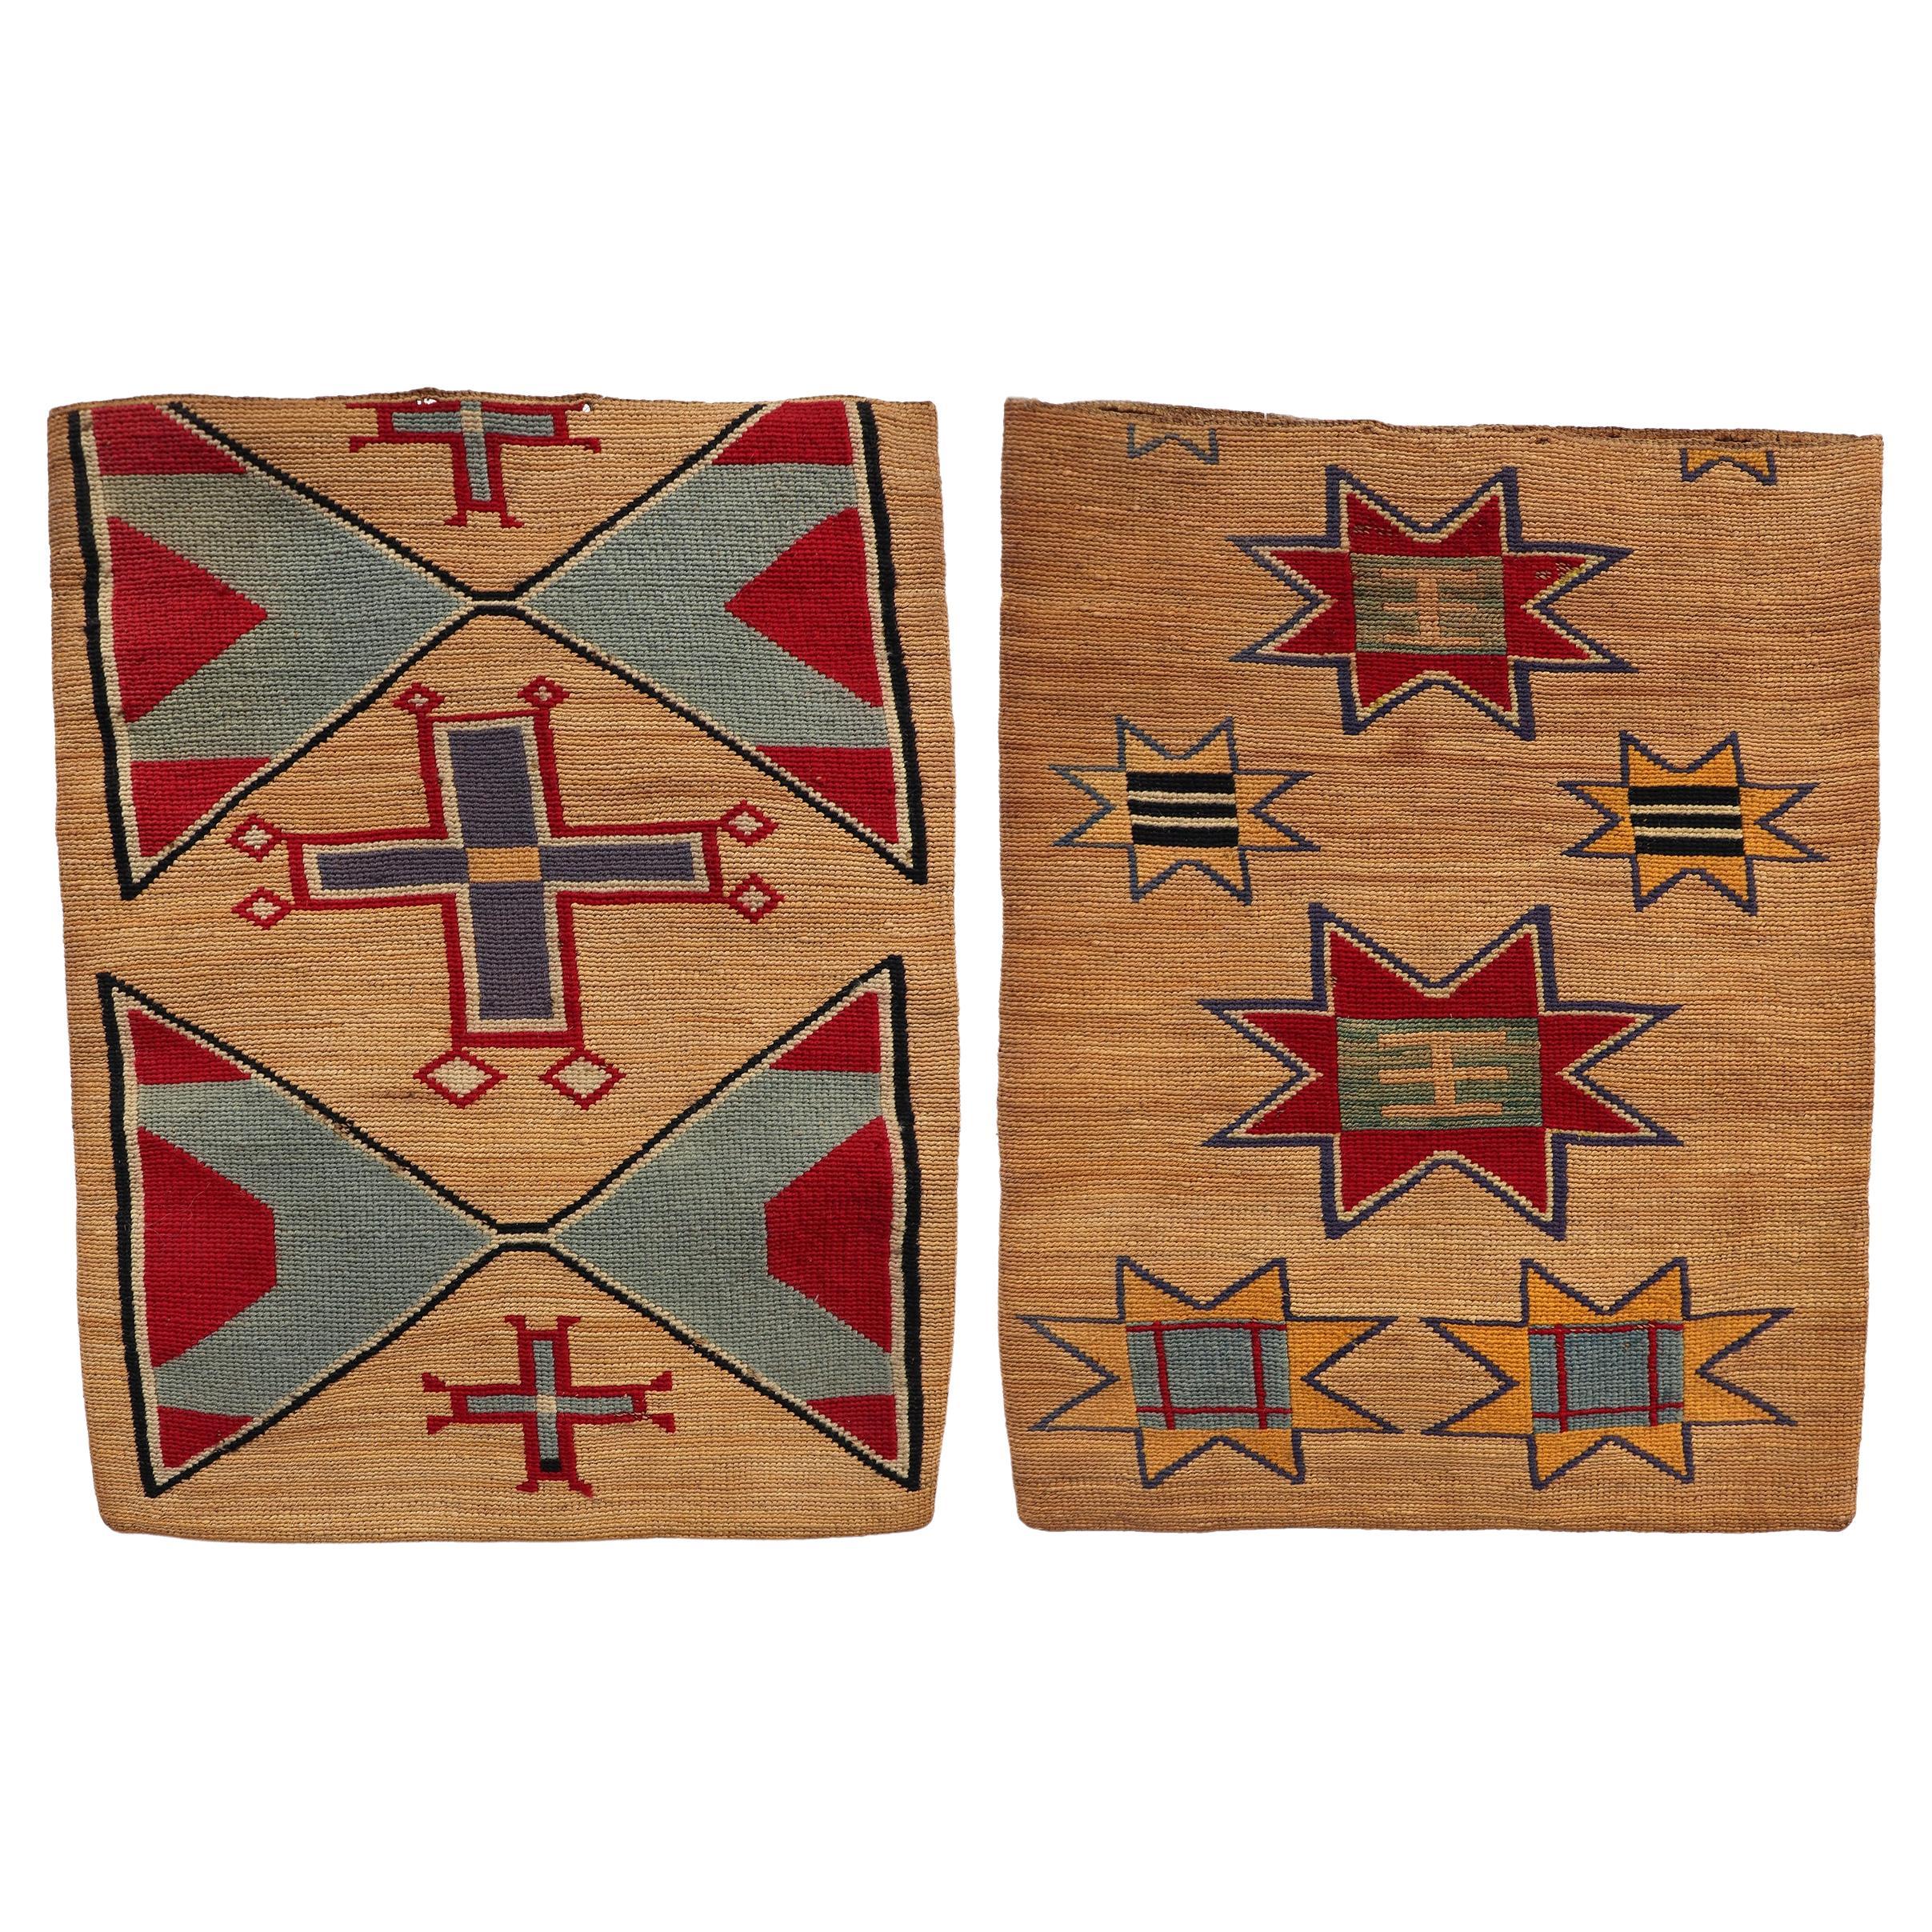 1890s Plateau Cornhusk Bag with Blue, Red, and Yellow Geometric Designs